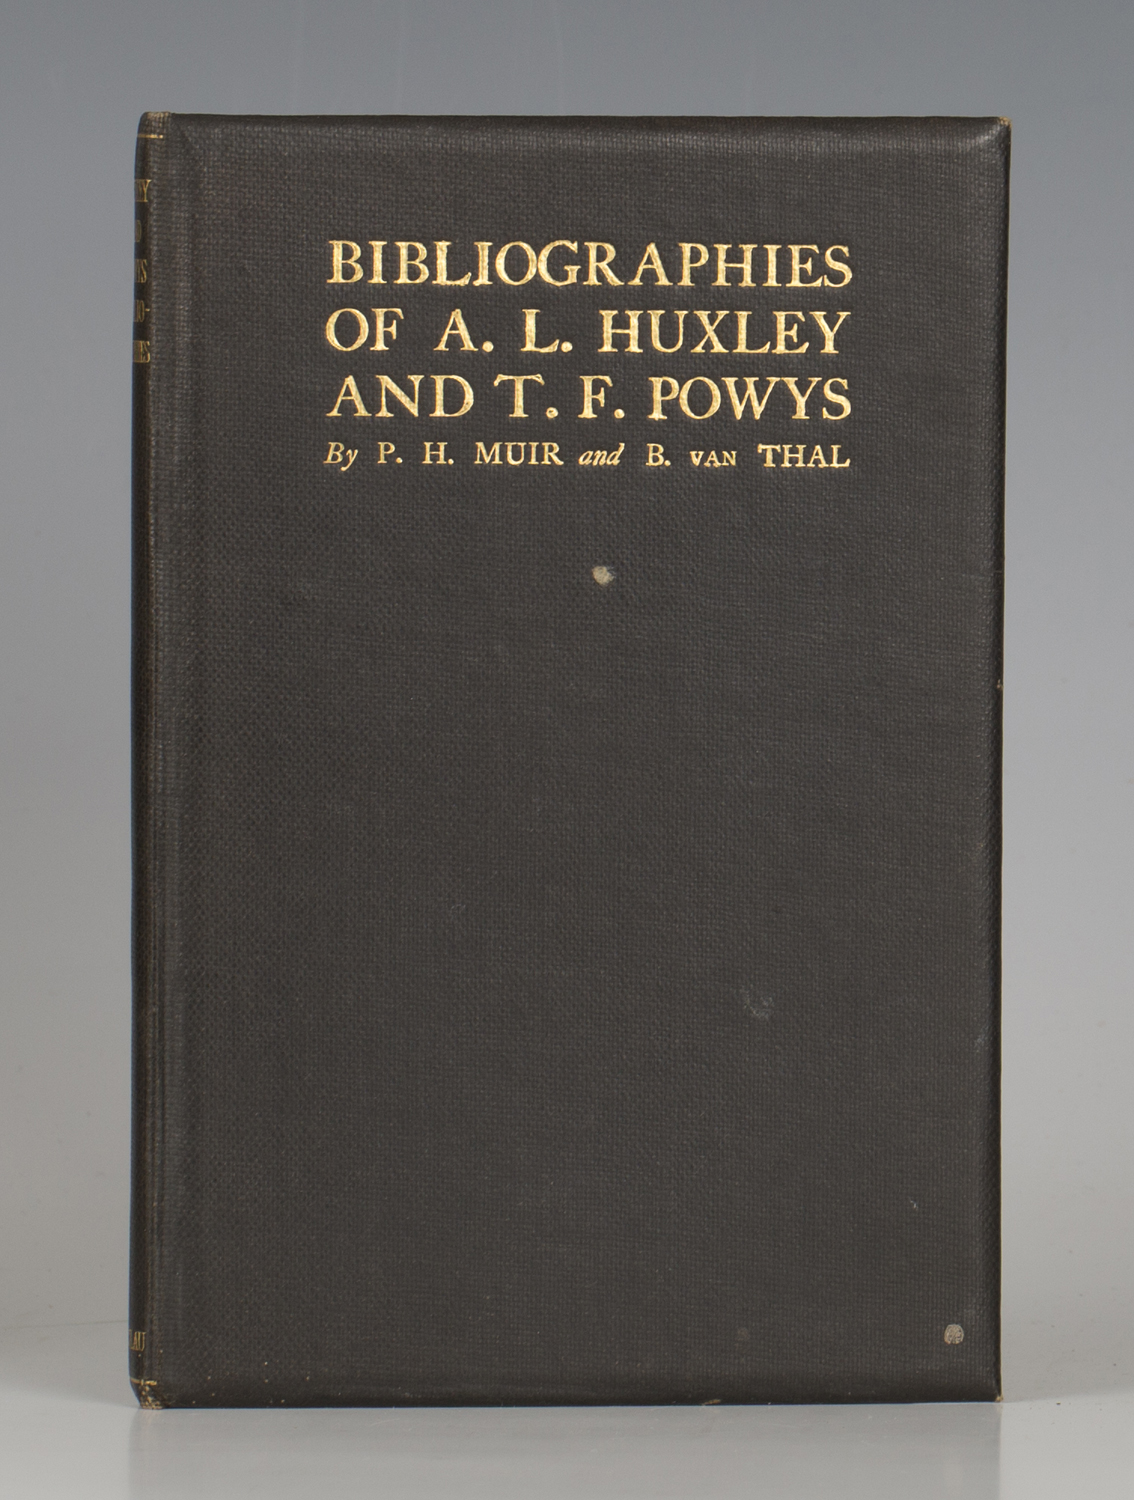 MUIR, P.H., and B. van THAL. Bibliographies of A.L. Huxley and T.F. Powys. London: Dulau & Co. Ltd., - Image 2 of 2